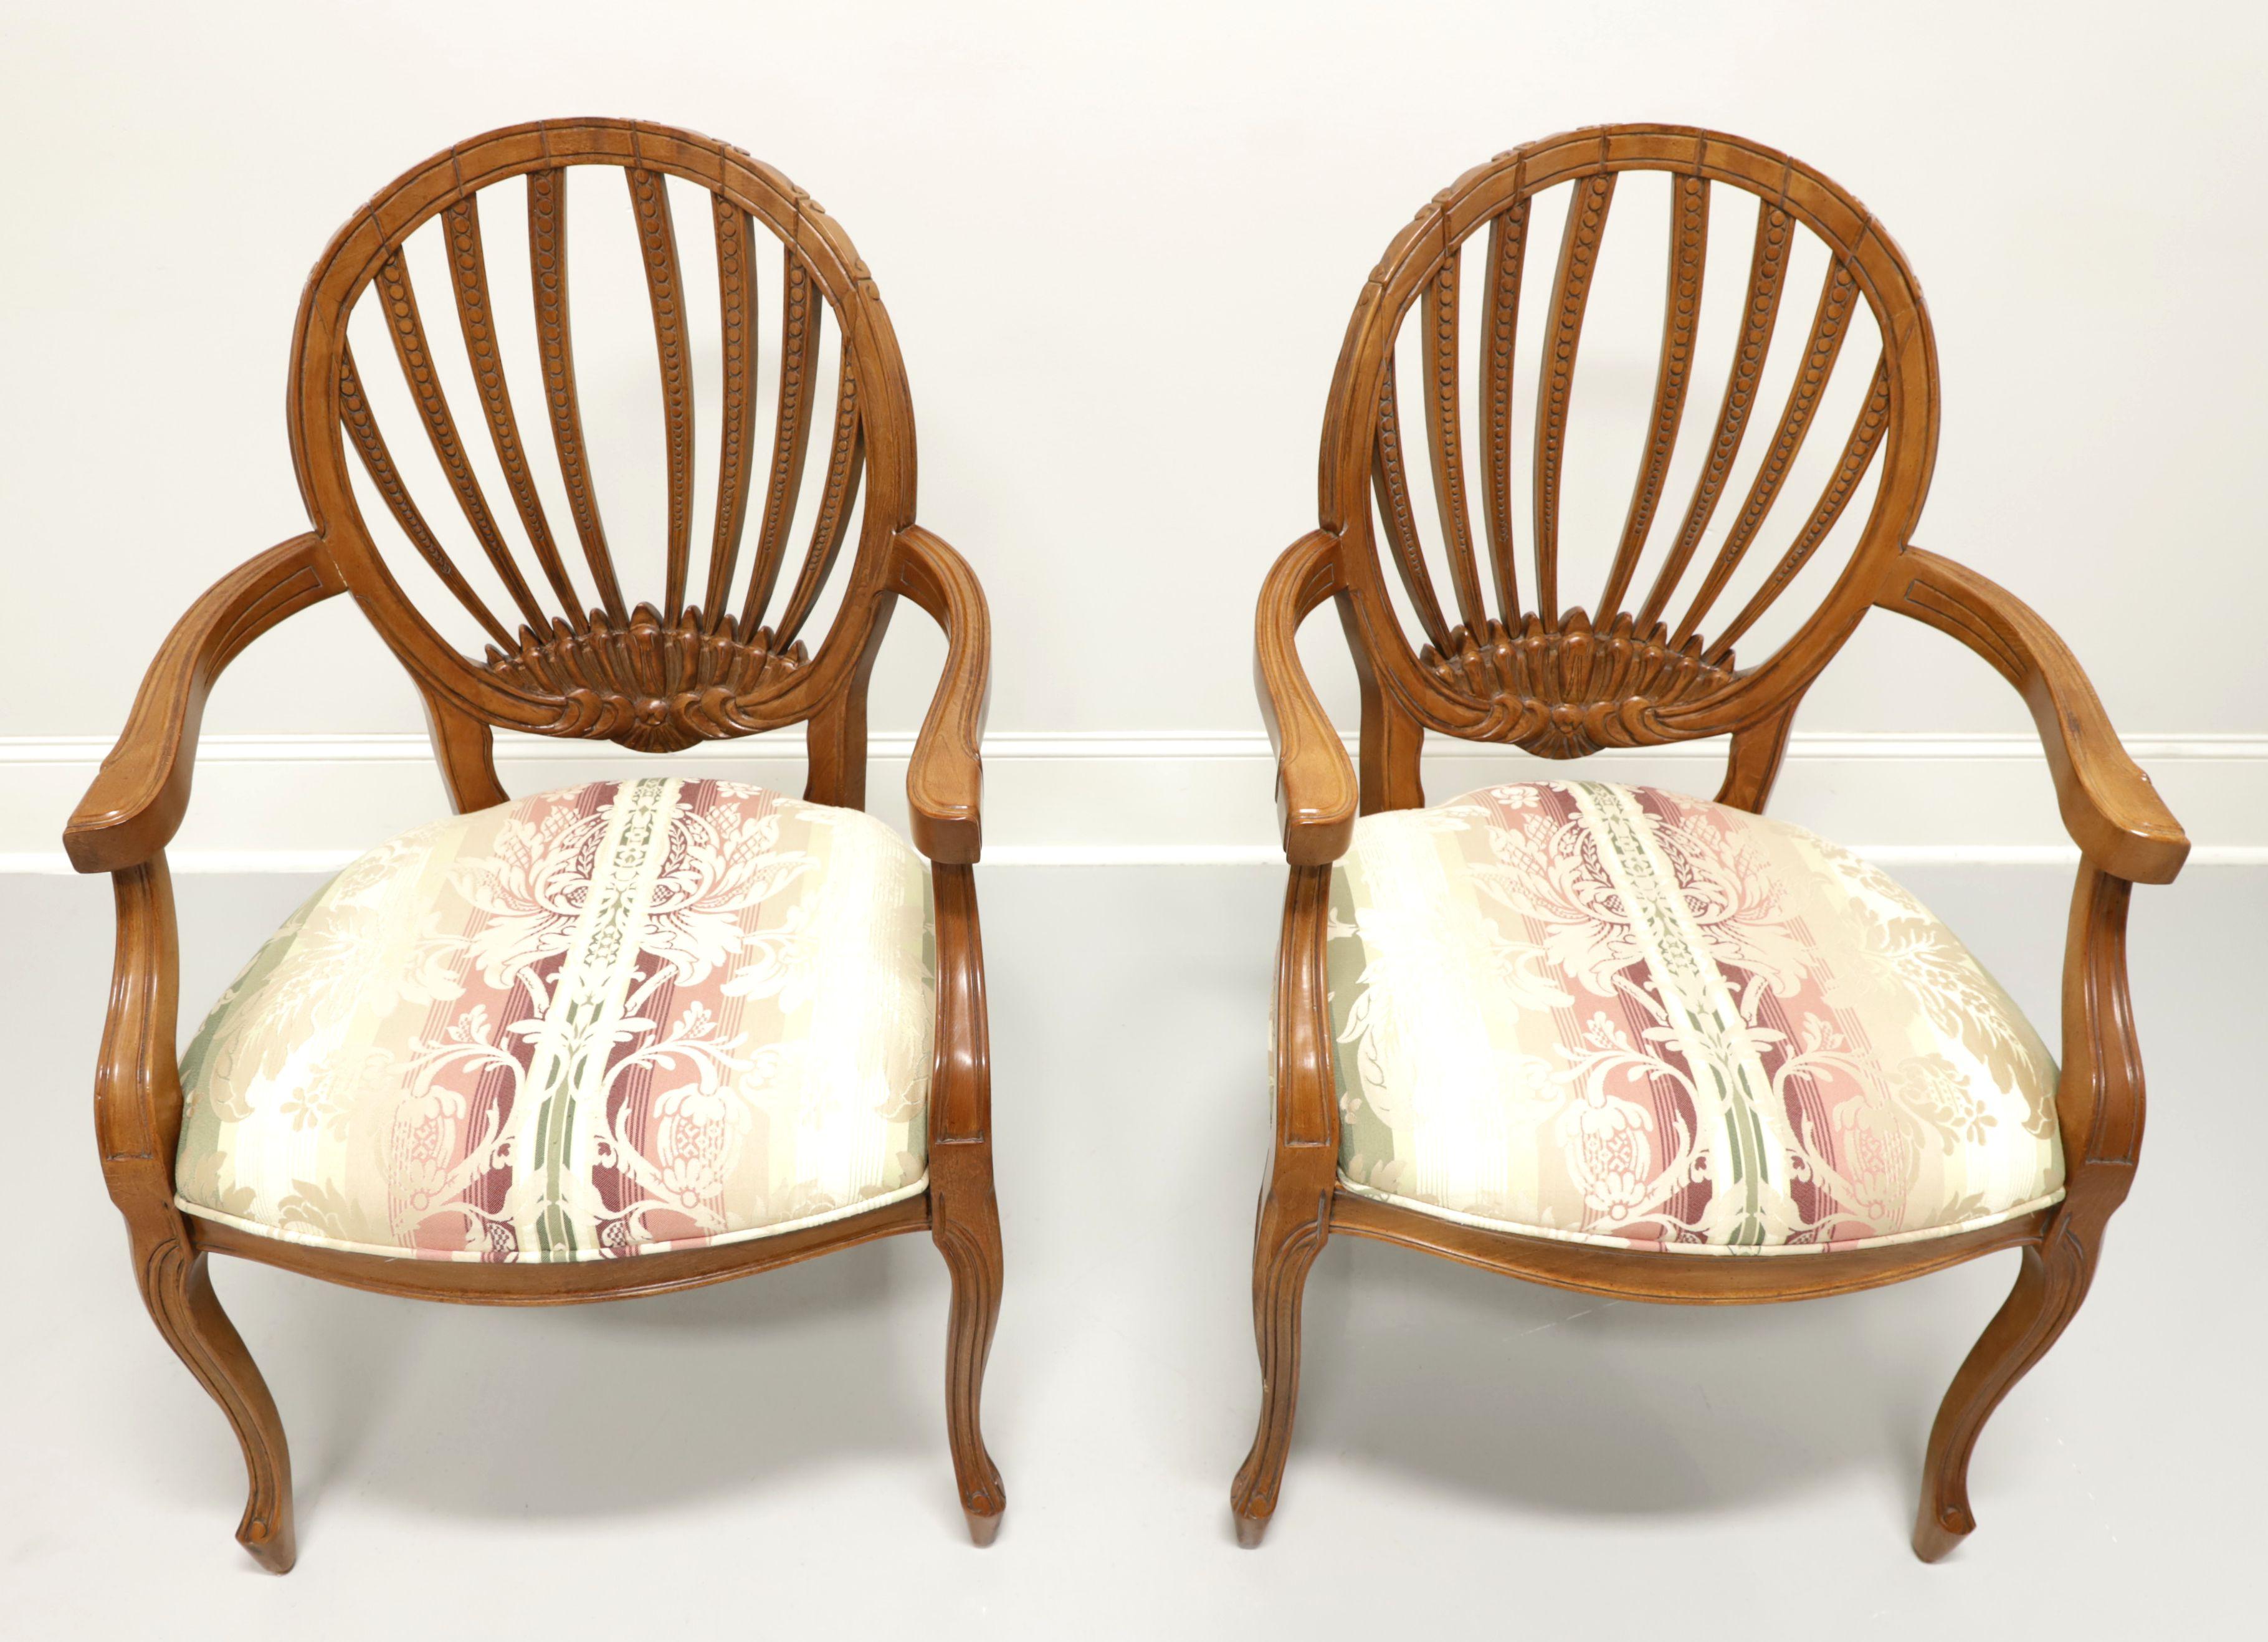 A pair of French Country style dining armchairs by Century Furniture, of Hickory, North Carolina, USA. Hardwood with a walnut finish, oval open carved design backs, carved curved arms, floral striped pattern fabric upholstered seats and curved legs.